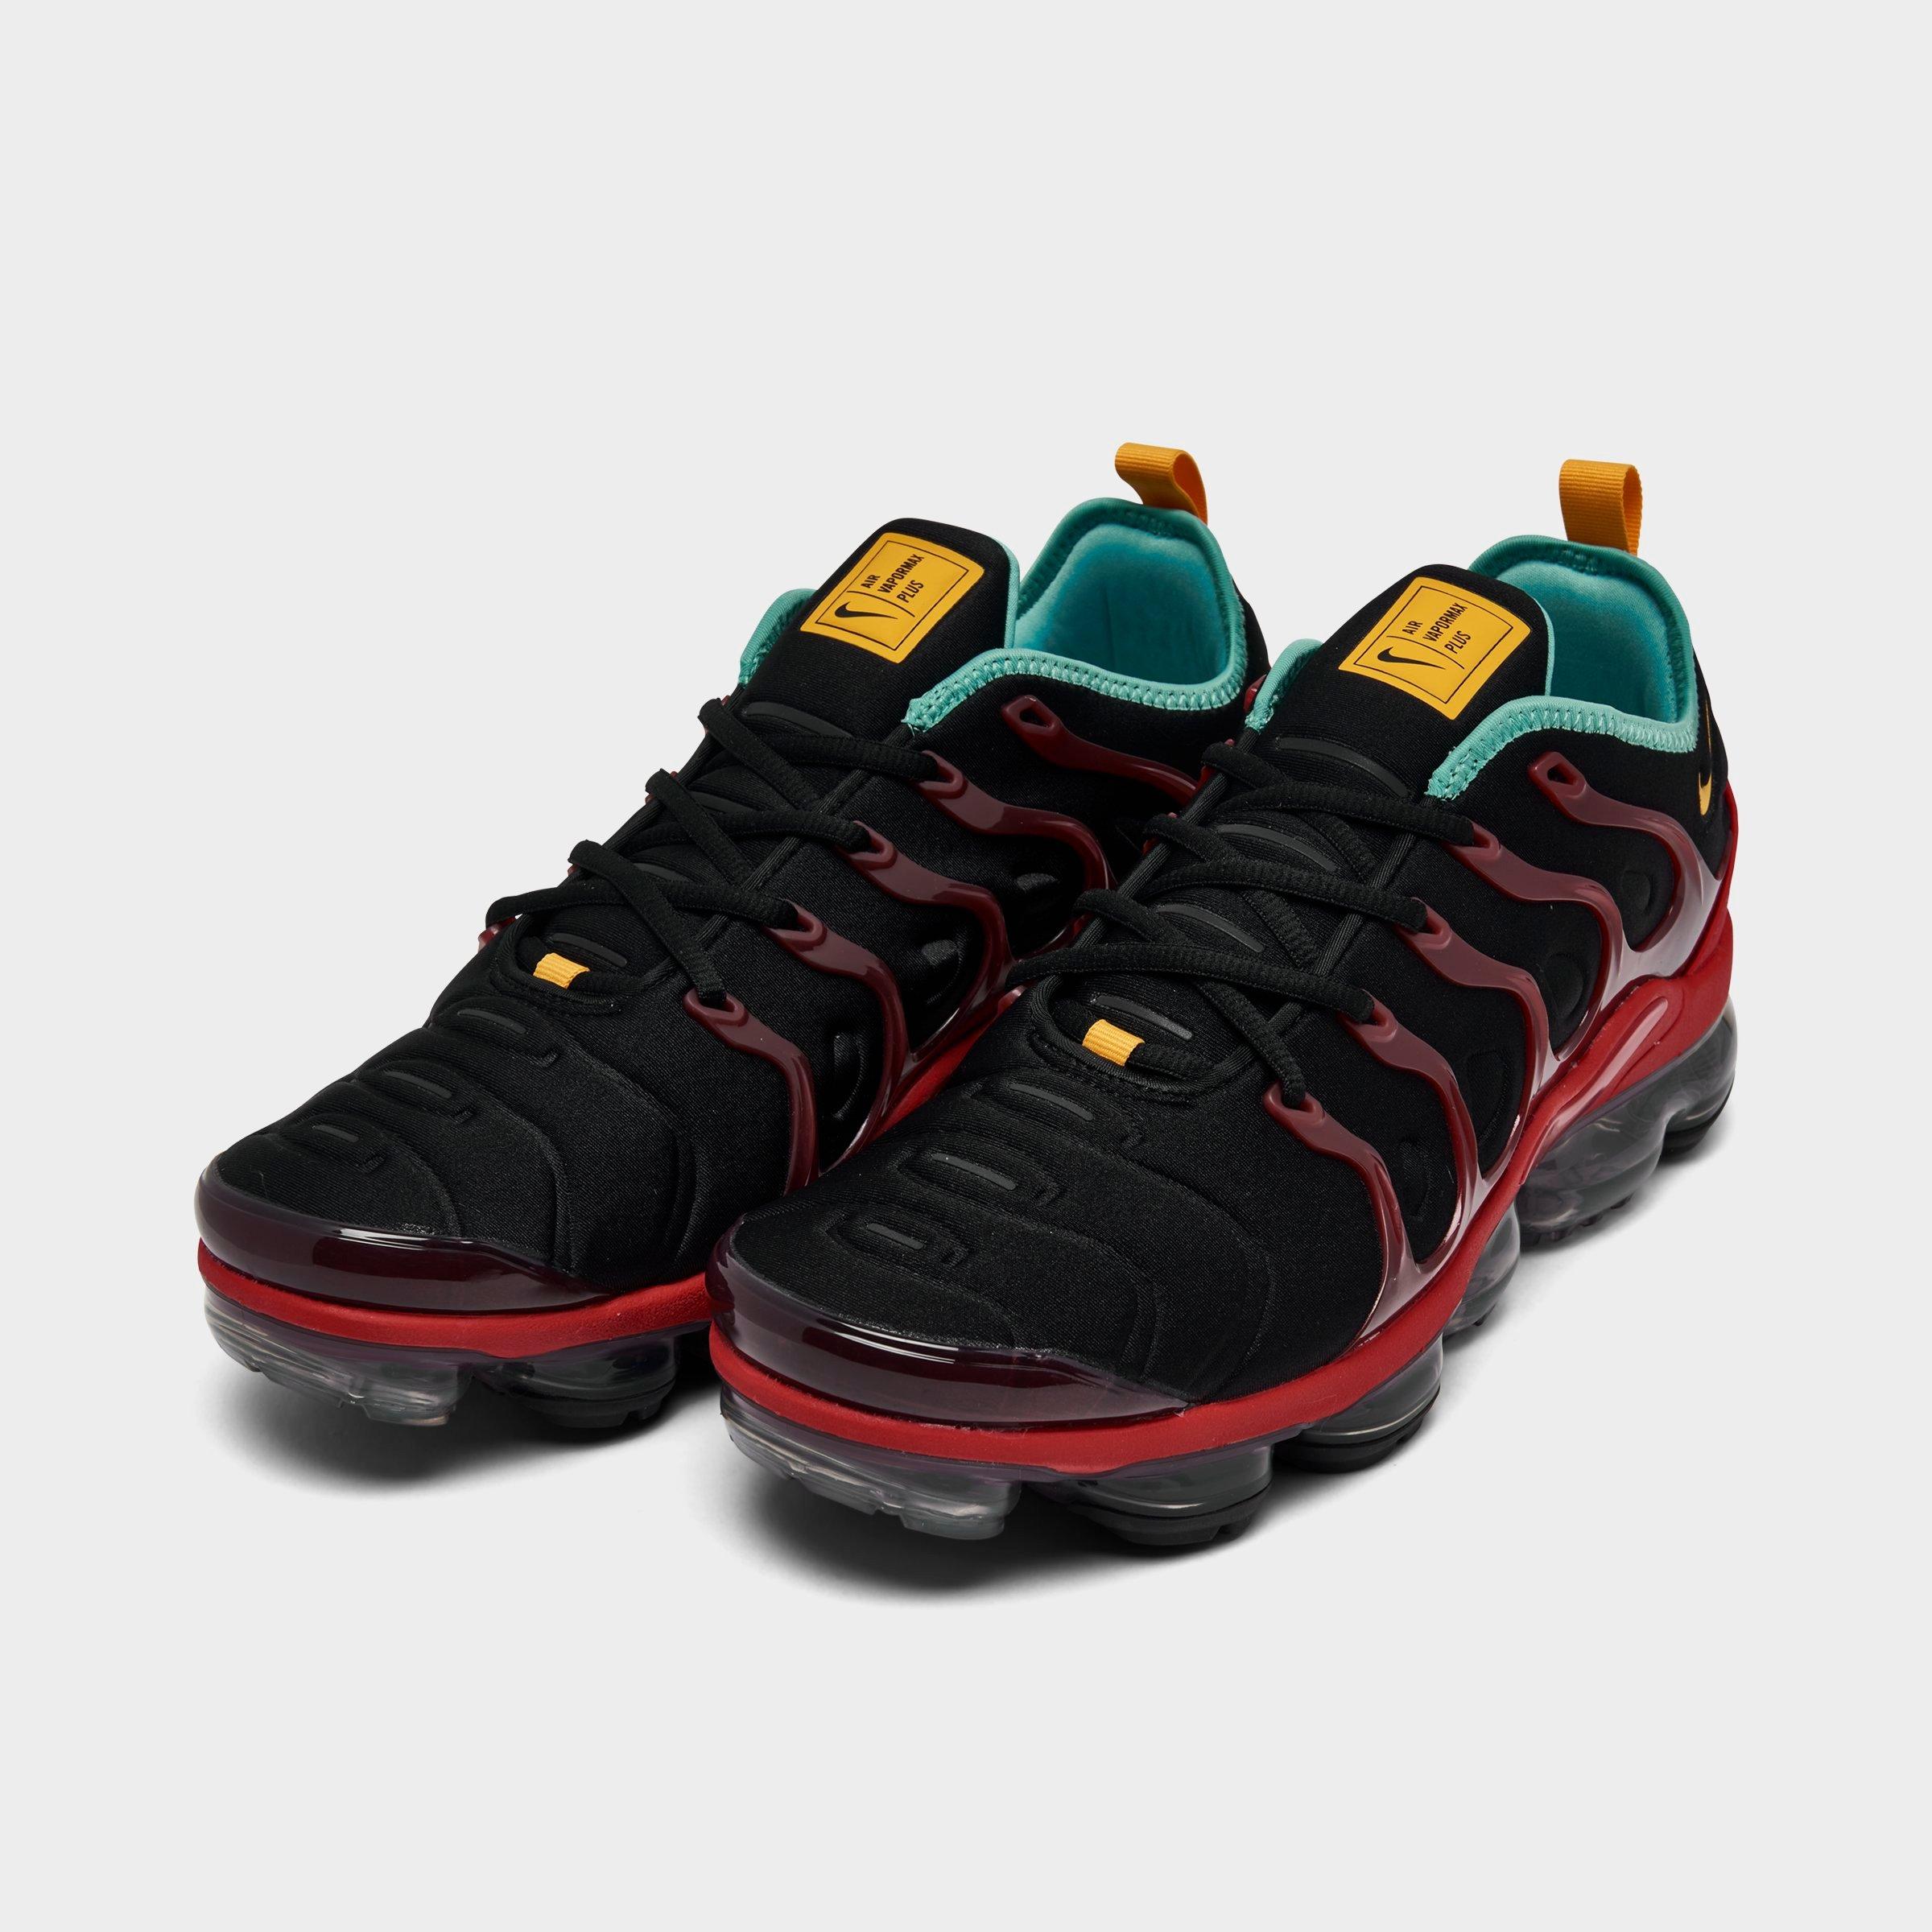 vapormax black red and gold